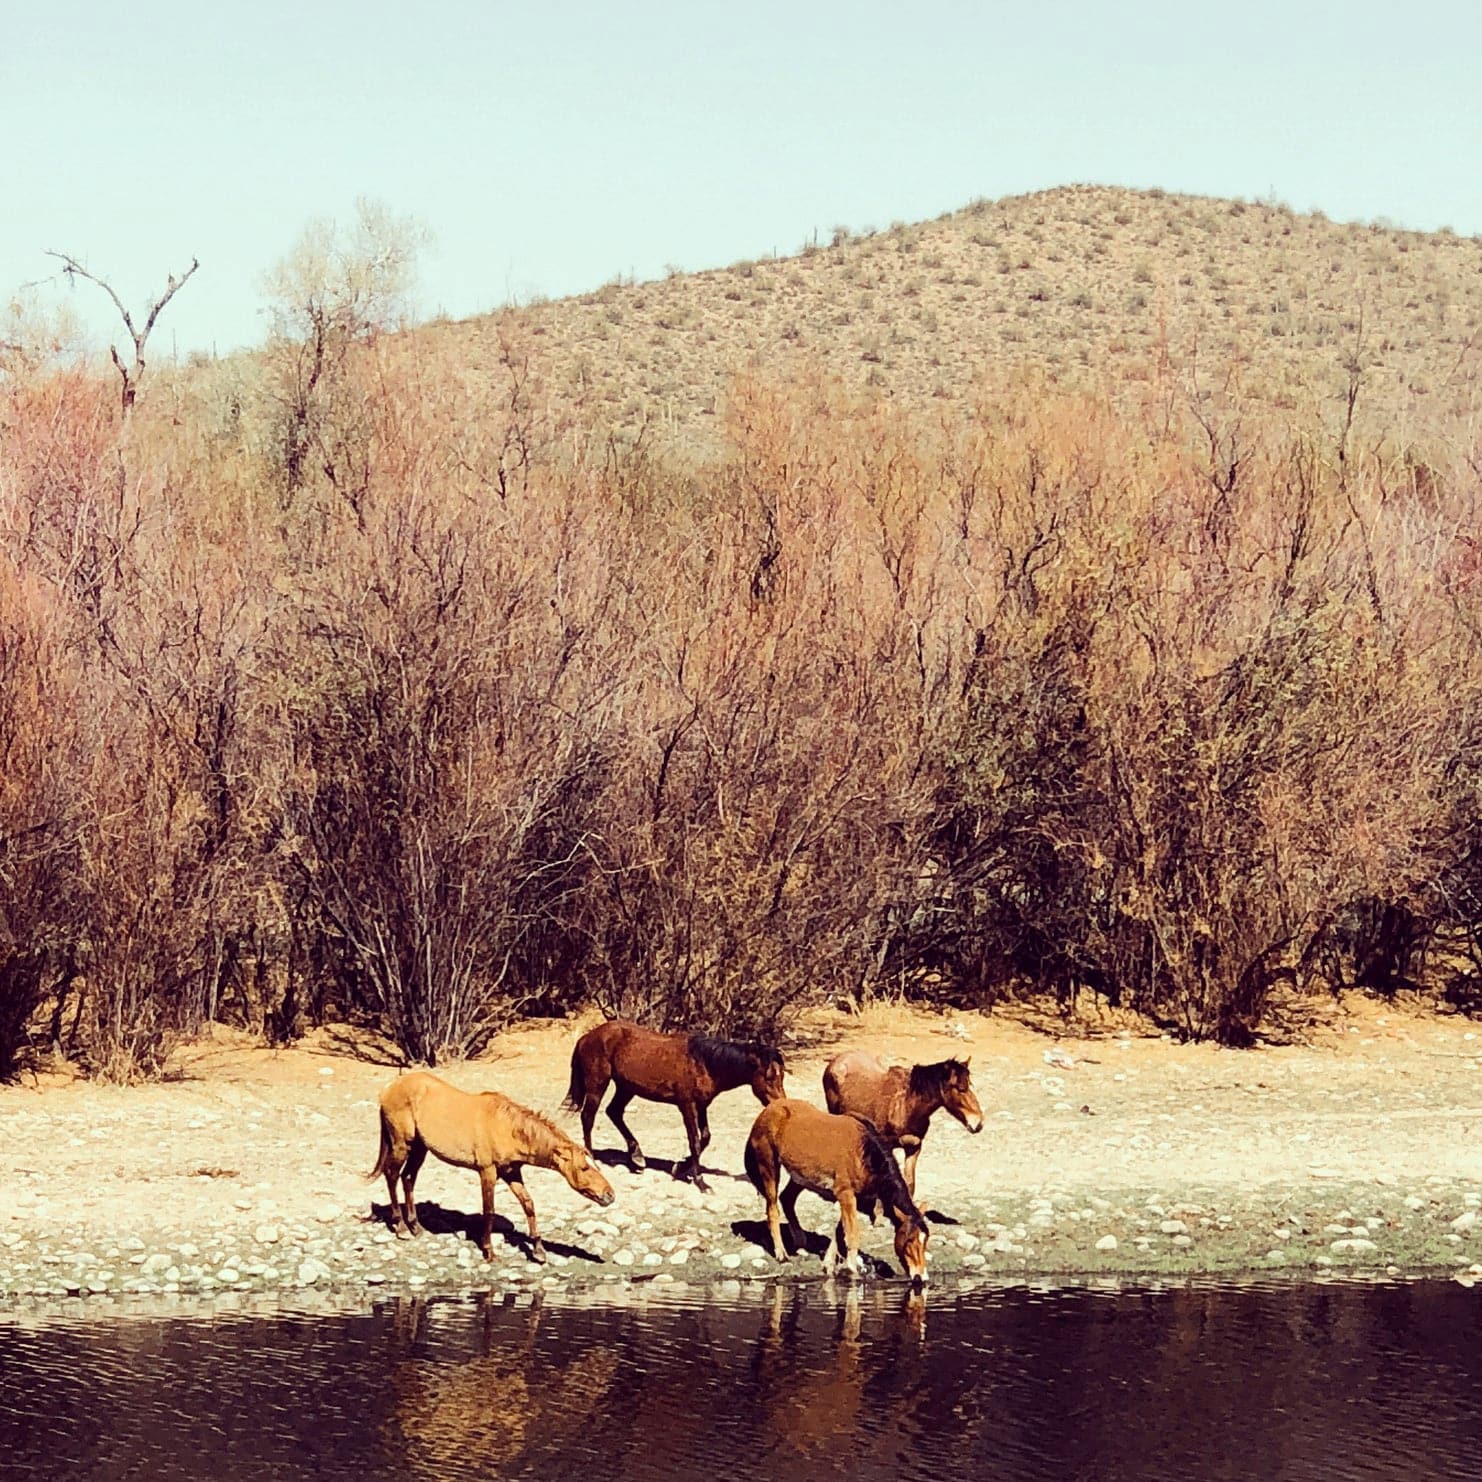 Wild horses on the beach beside a river with arid mountainous landscape in the background.